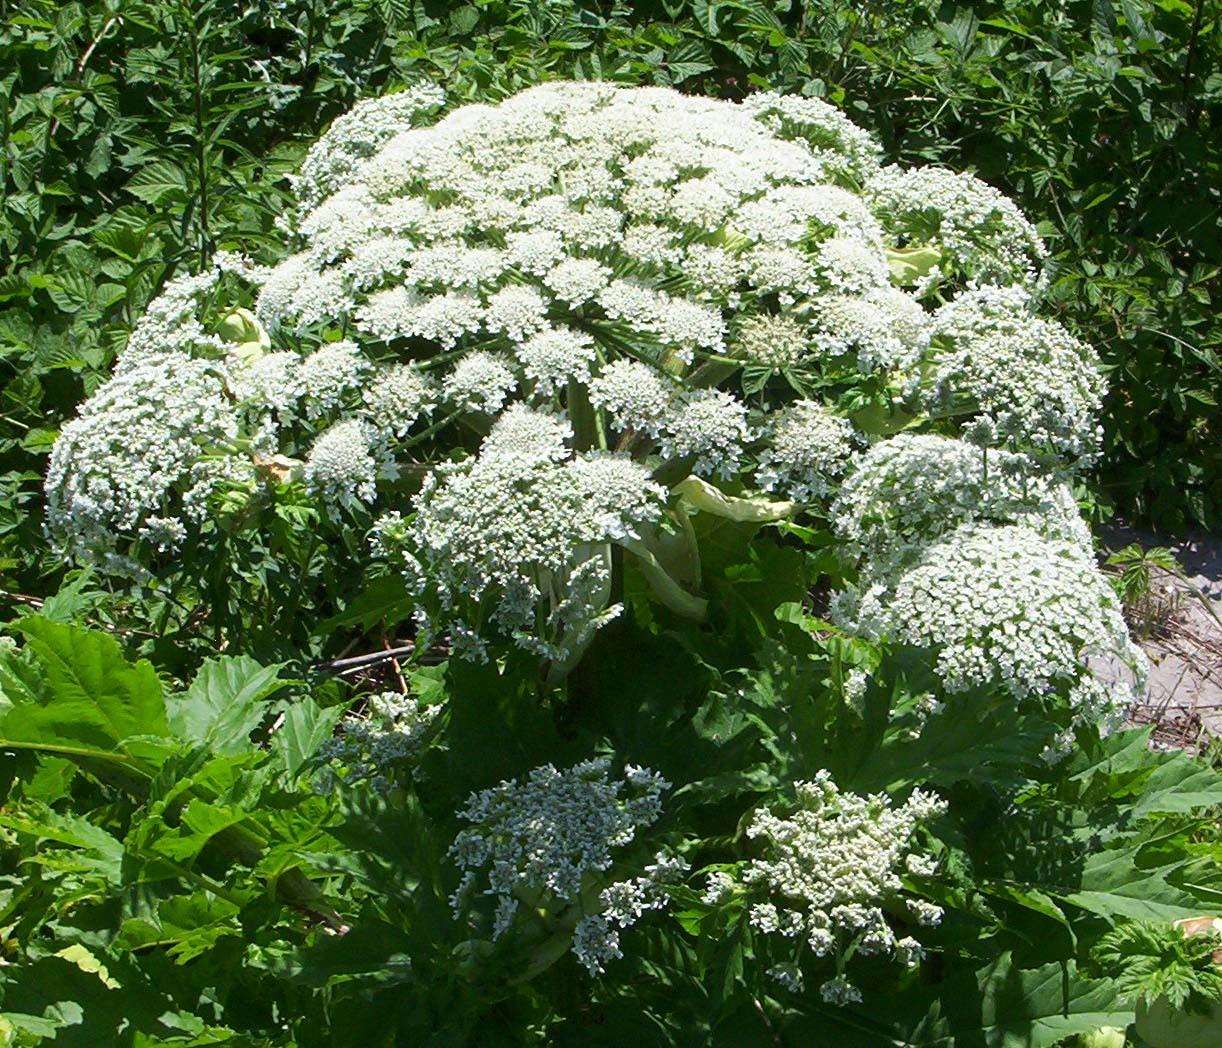 Giant hogweed. Picture: Wikimedia Commons - Appaloosa